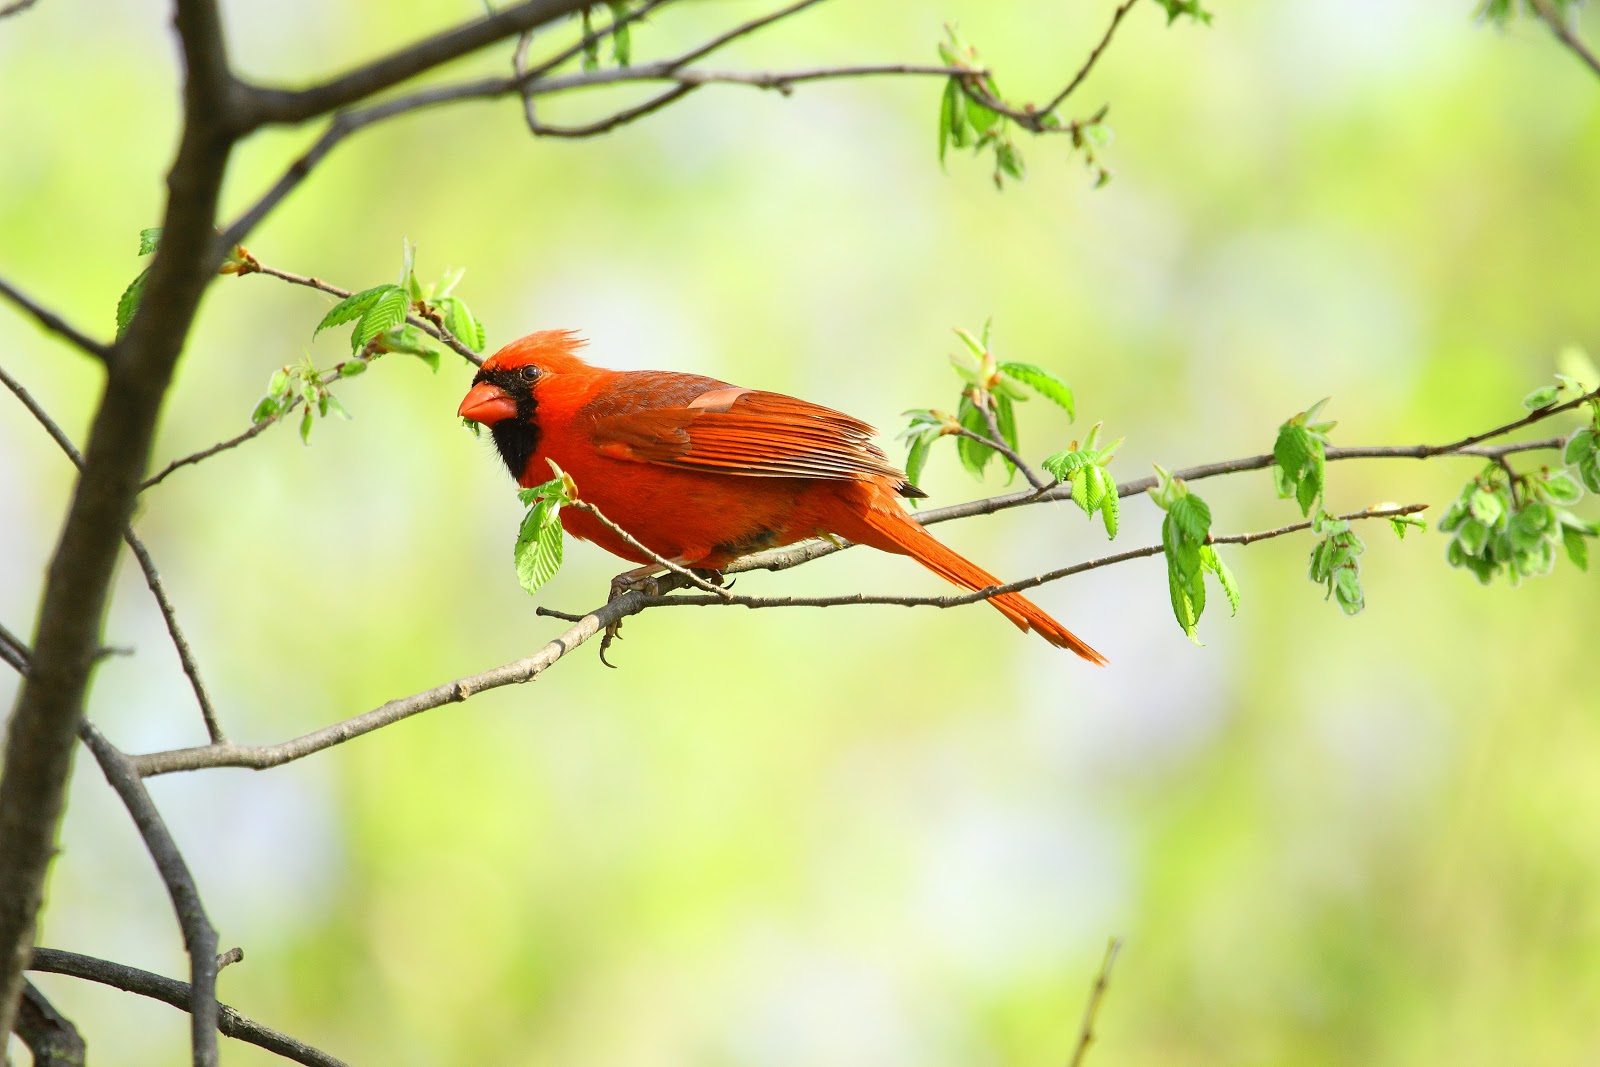 Northern Cardinal image - click on image for sound